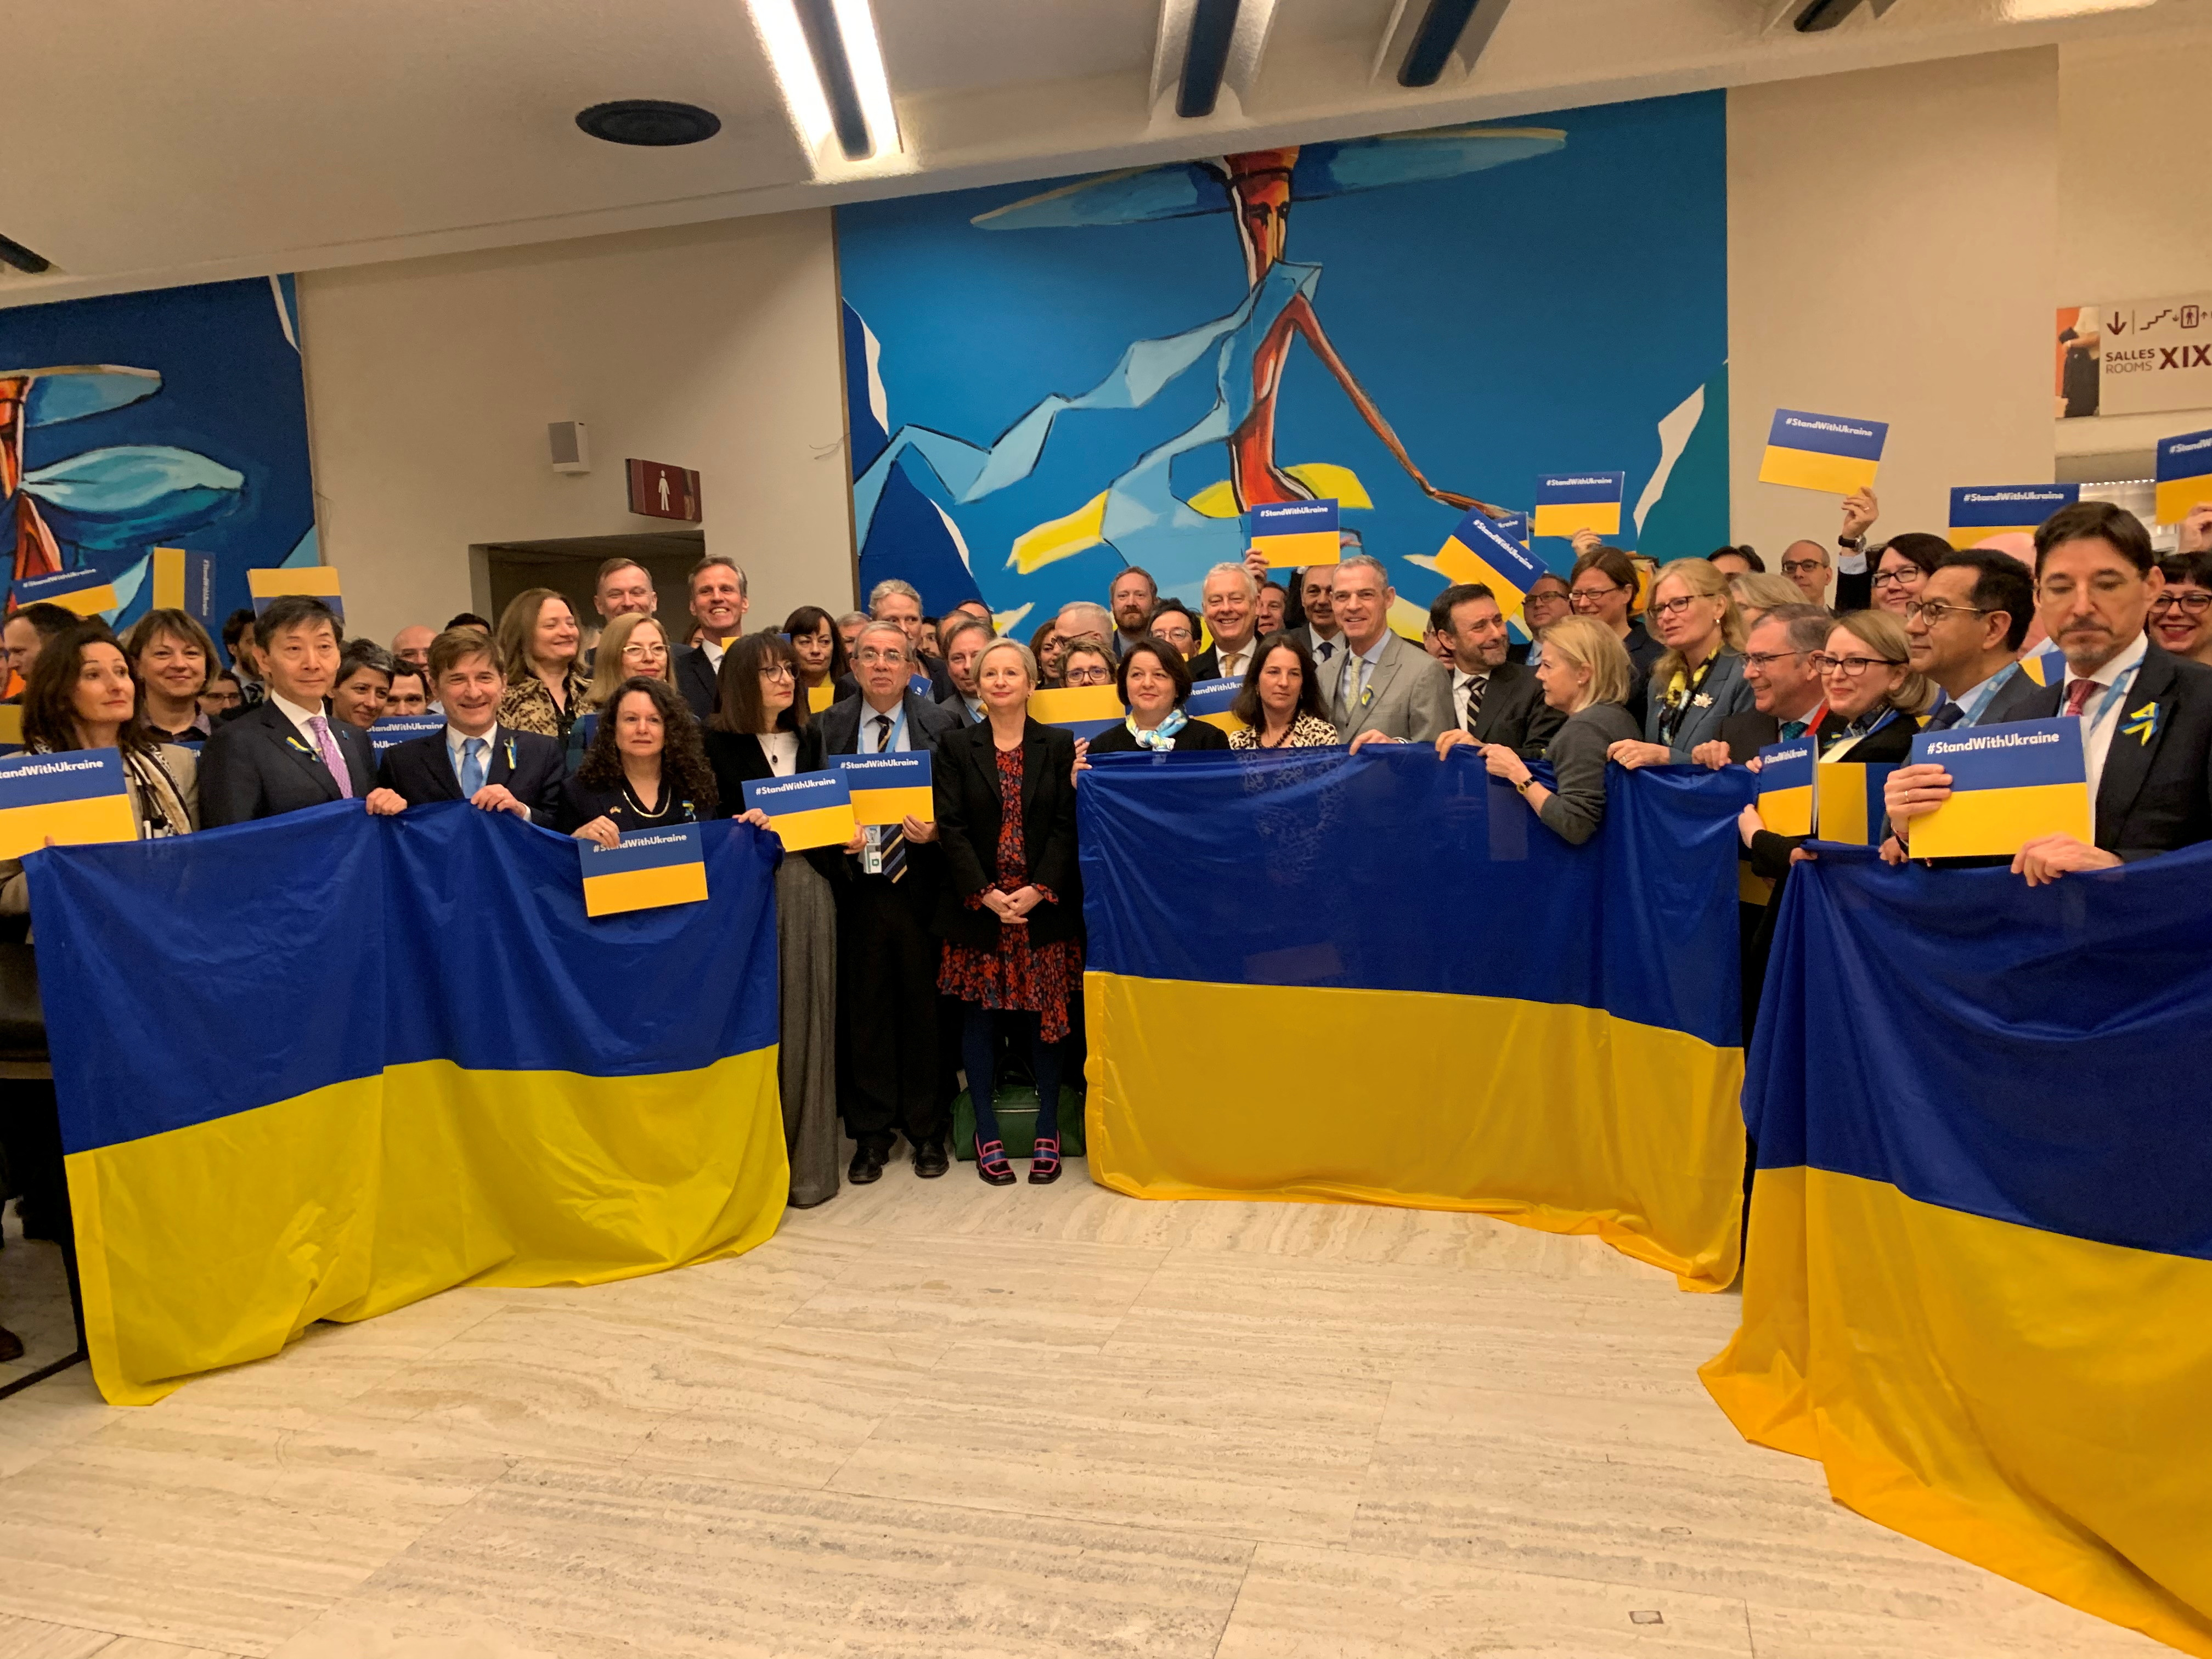 Ambassadors and delegates hold signs and flags in support of Ukraine during speech by Russian Deputy Foreign Minister Ryabkov in Geneva